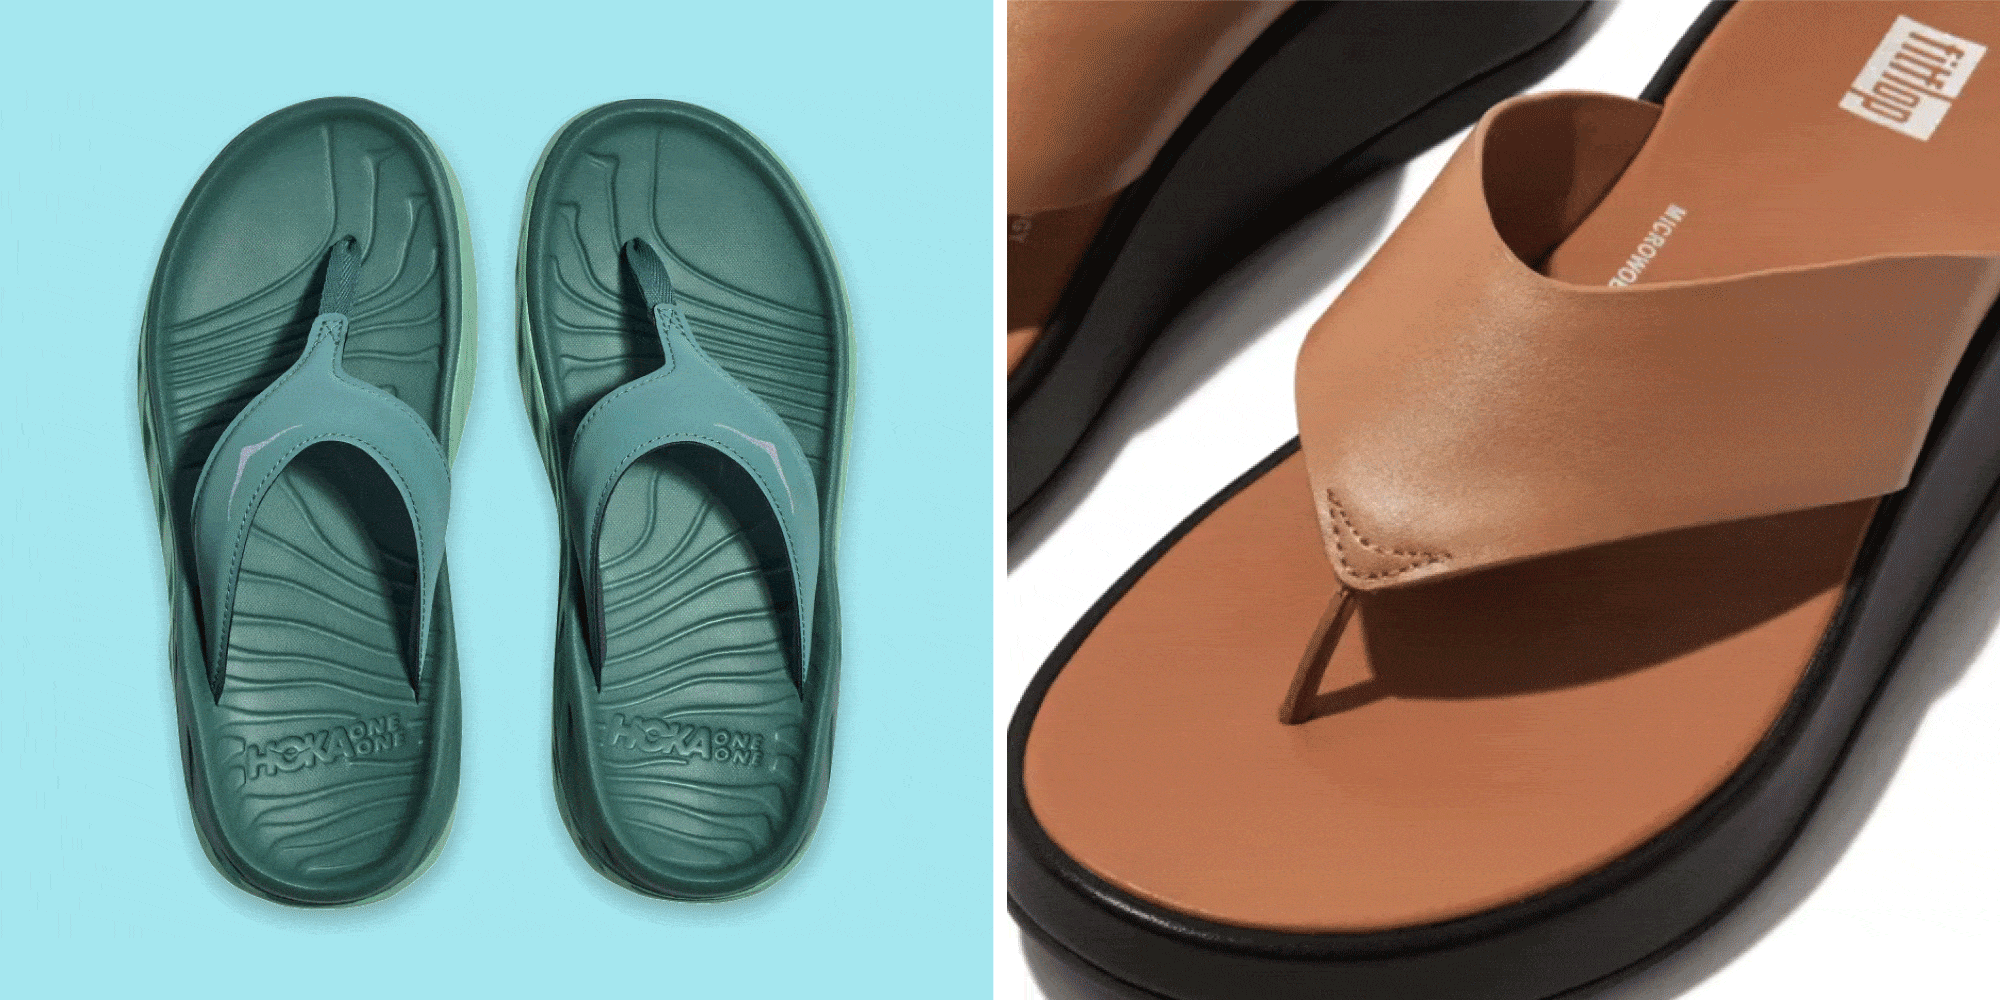 Eco Flips | Comfortable slippers, Flipping, Slippers